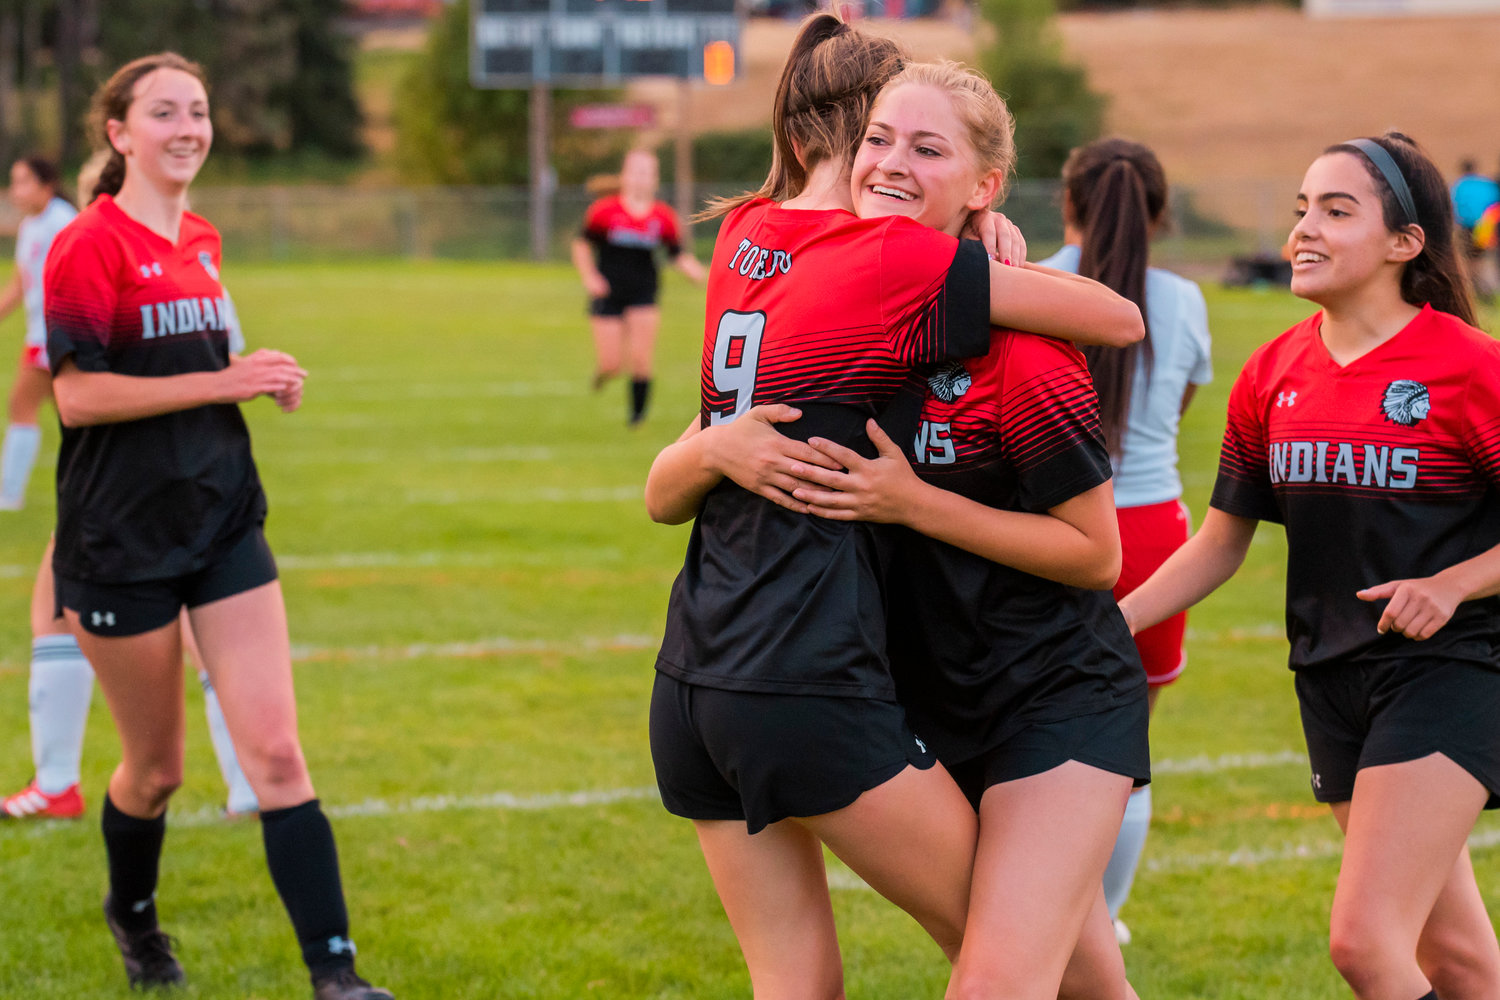 Toledo’s Vanesa Rodriguz (12) smiles and hugs Marina Smith (9) after a goal Tuesday during a game against Hoquiam.